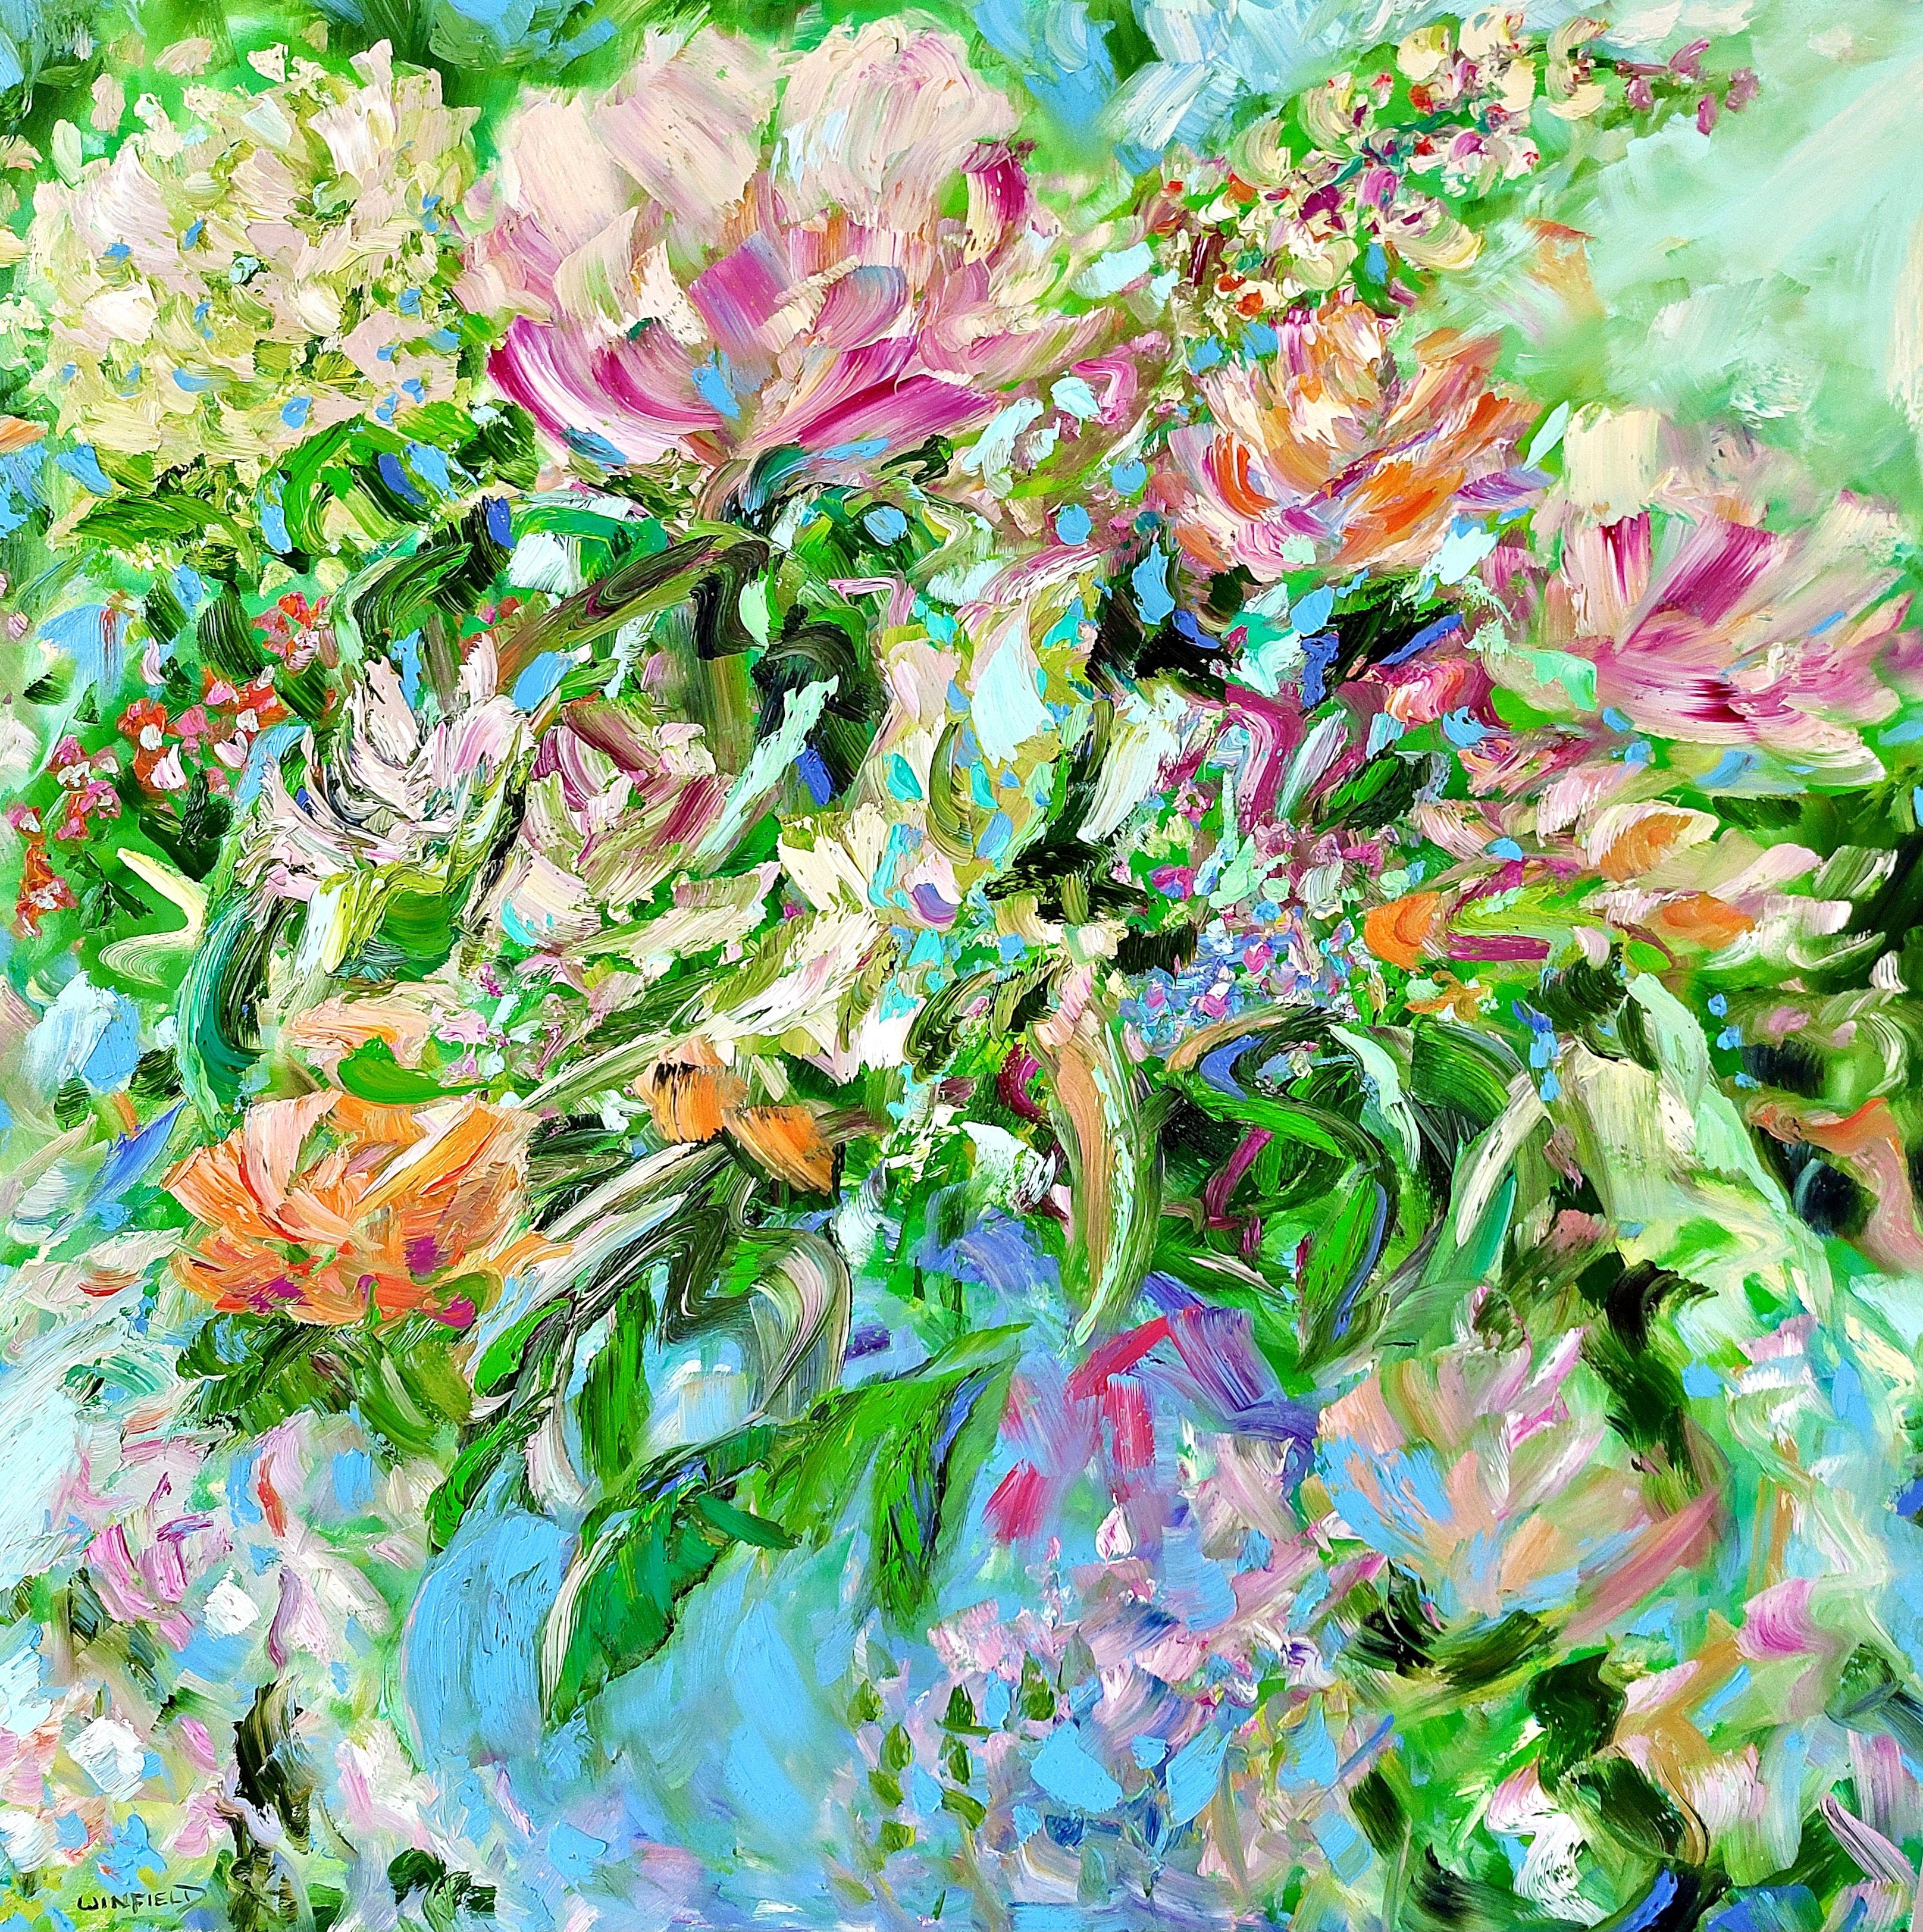 When nature takes over the container (vase) that we provide for the flowers. :: Painting :: Impressionist :: This piece comes with an official certificate of authenticity signed by the artist :: Ready to Hang: Yes :: Signed: Yes :: Signature